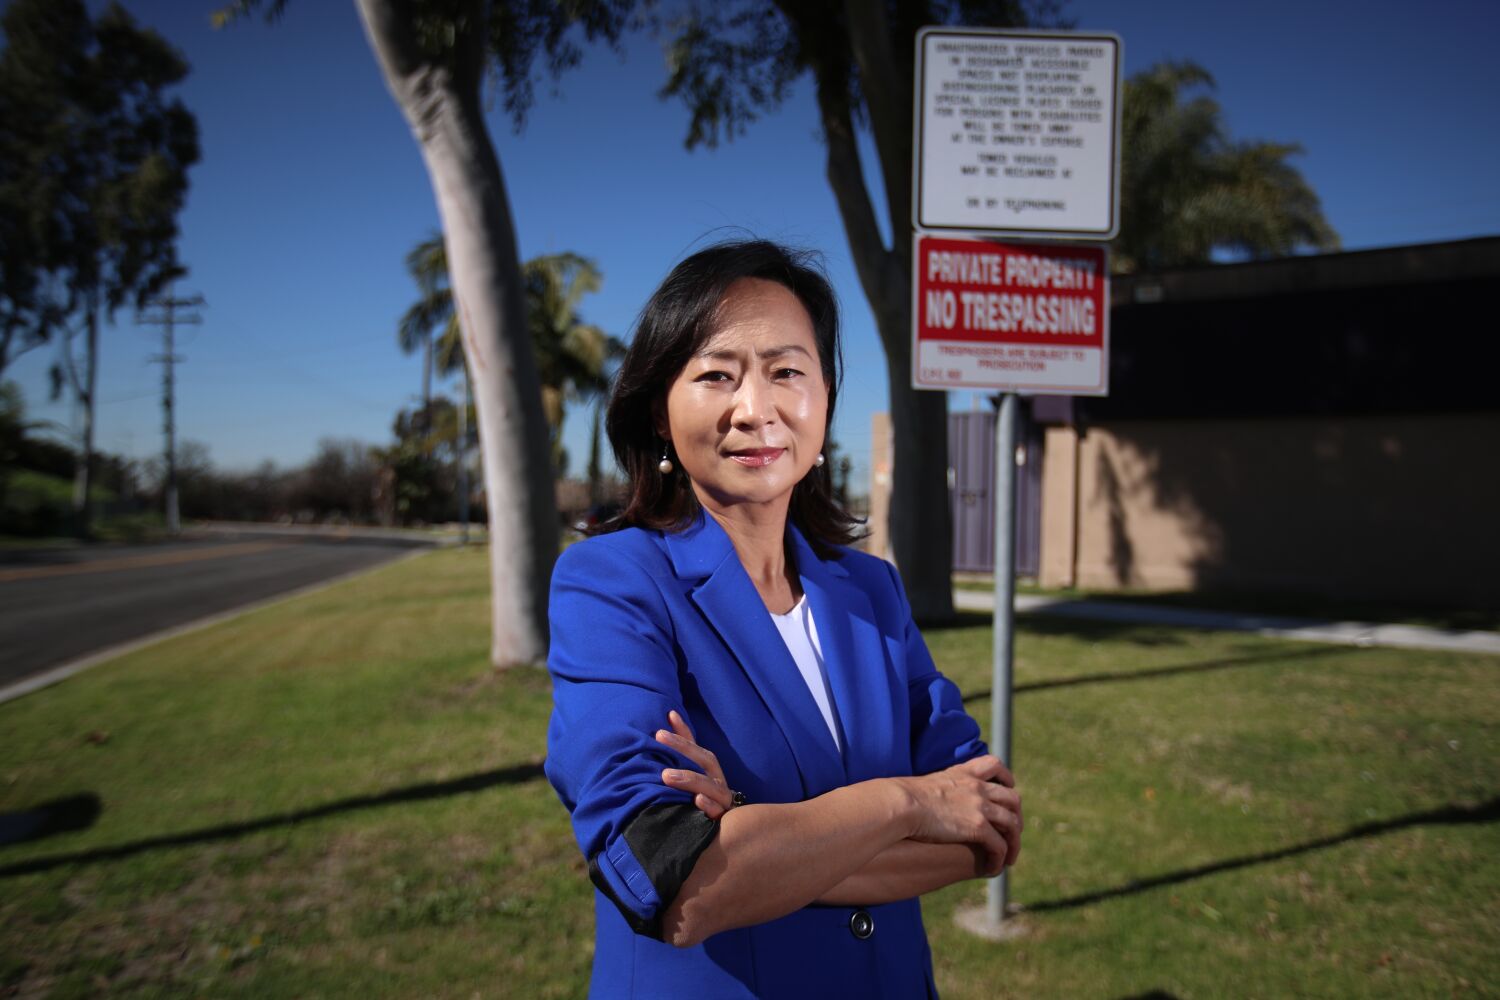 Criminal charges against recall proponents reveal underside of Buena Park politics